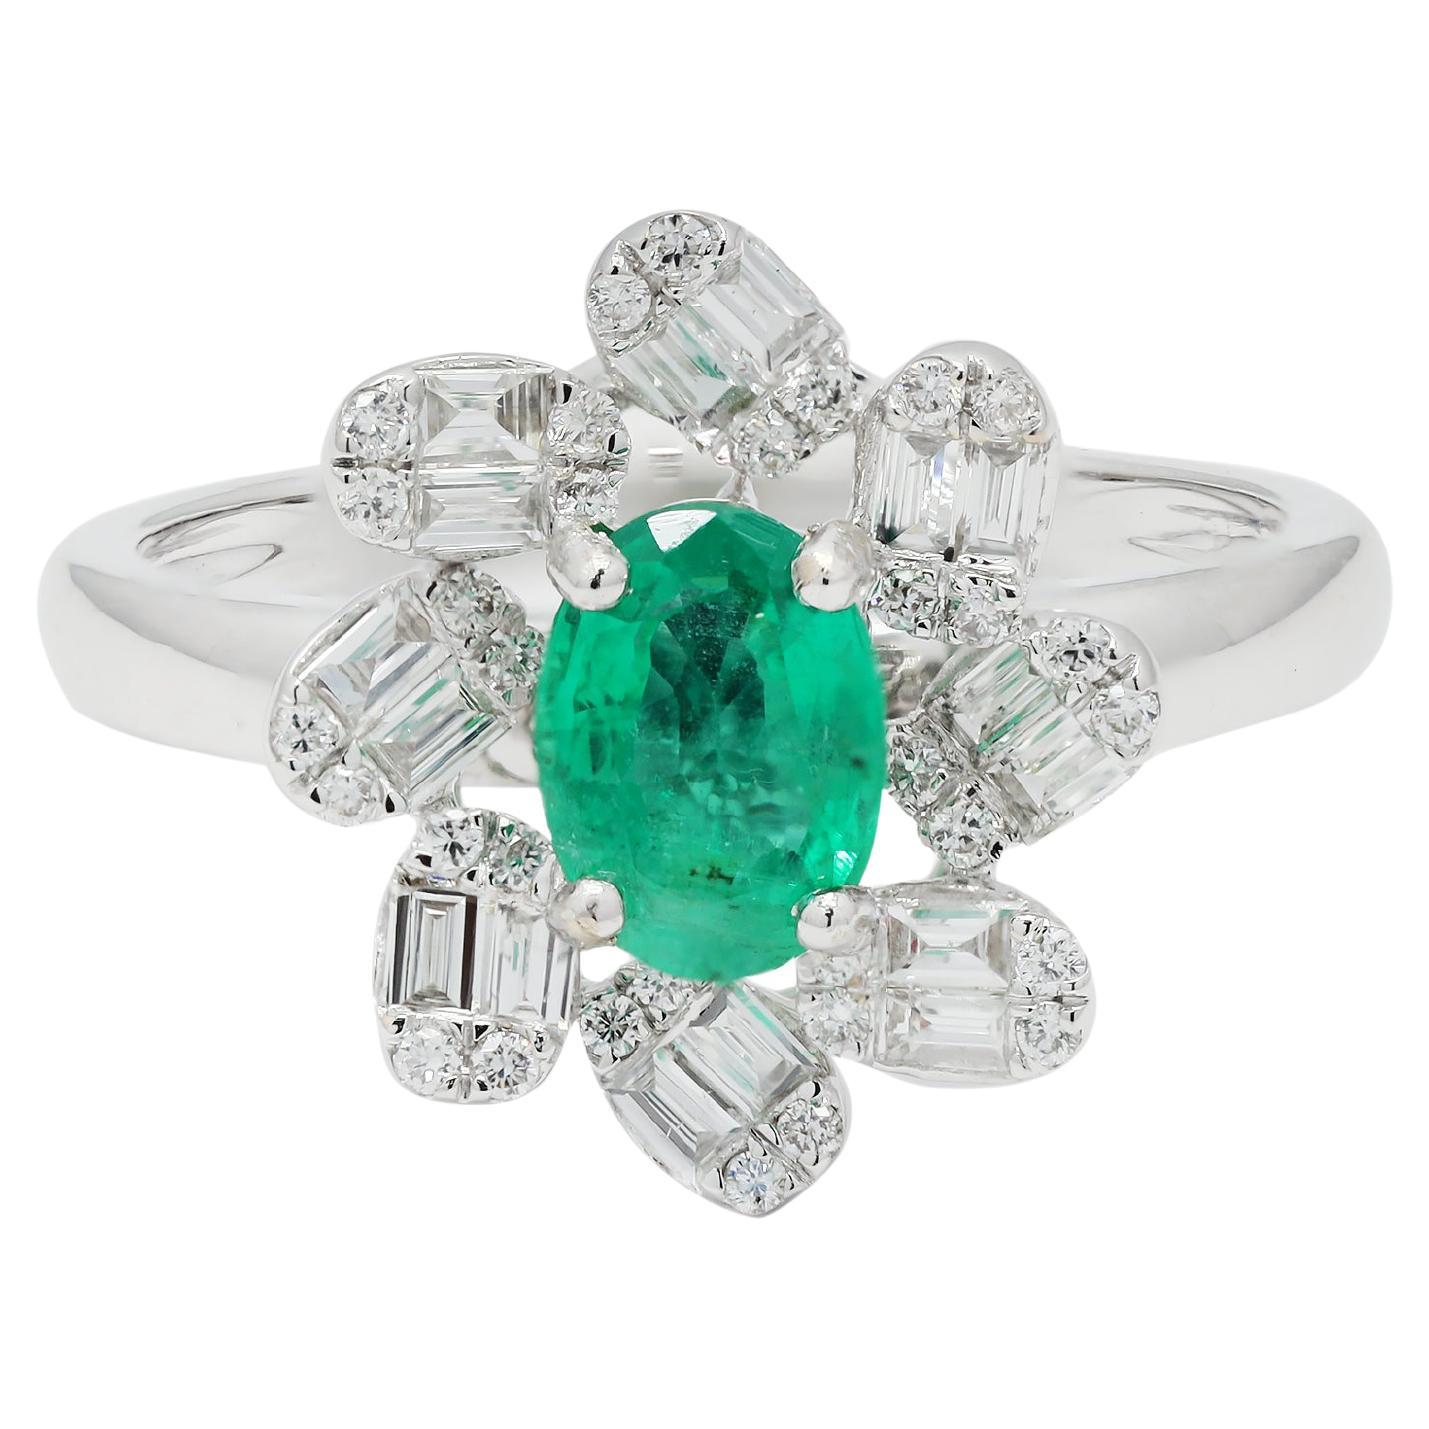 Designer Oval Cut Emerald and Diamond Engagement Ring in 18K Solid White Gold